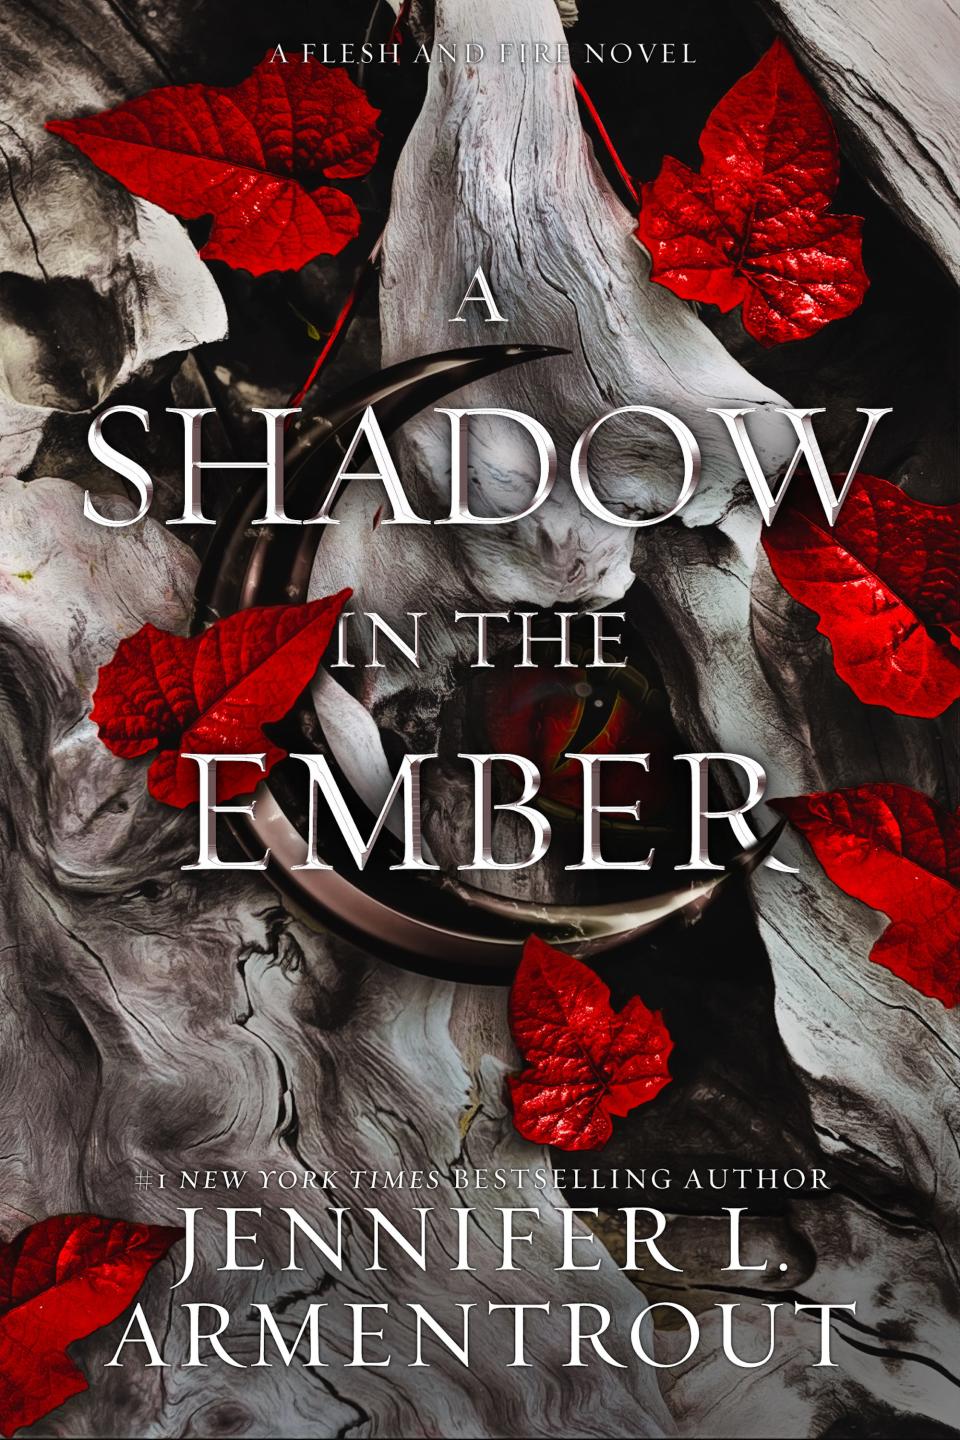 "A Shadow in the Ember" by Jennifer L. Armentrout.